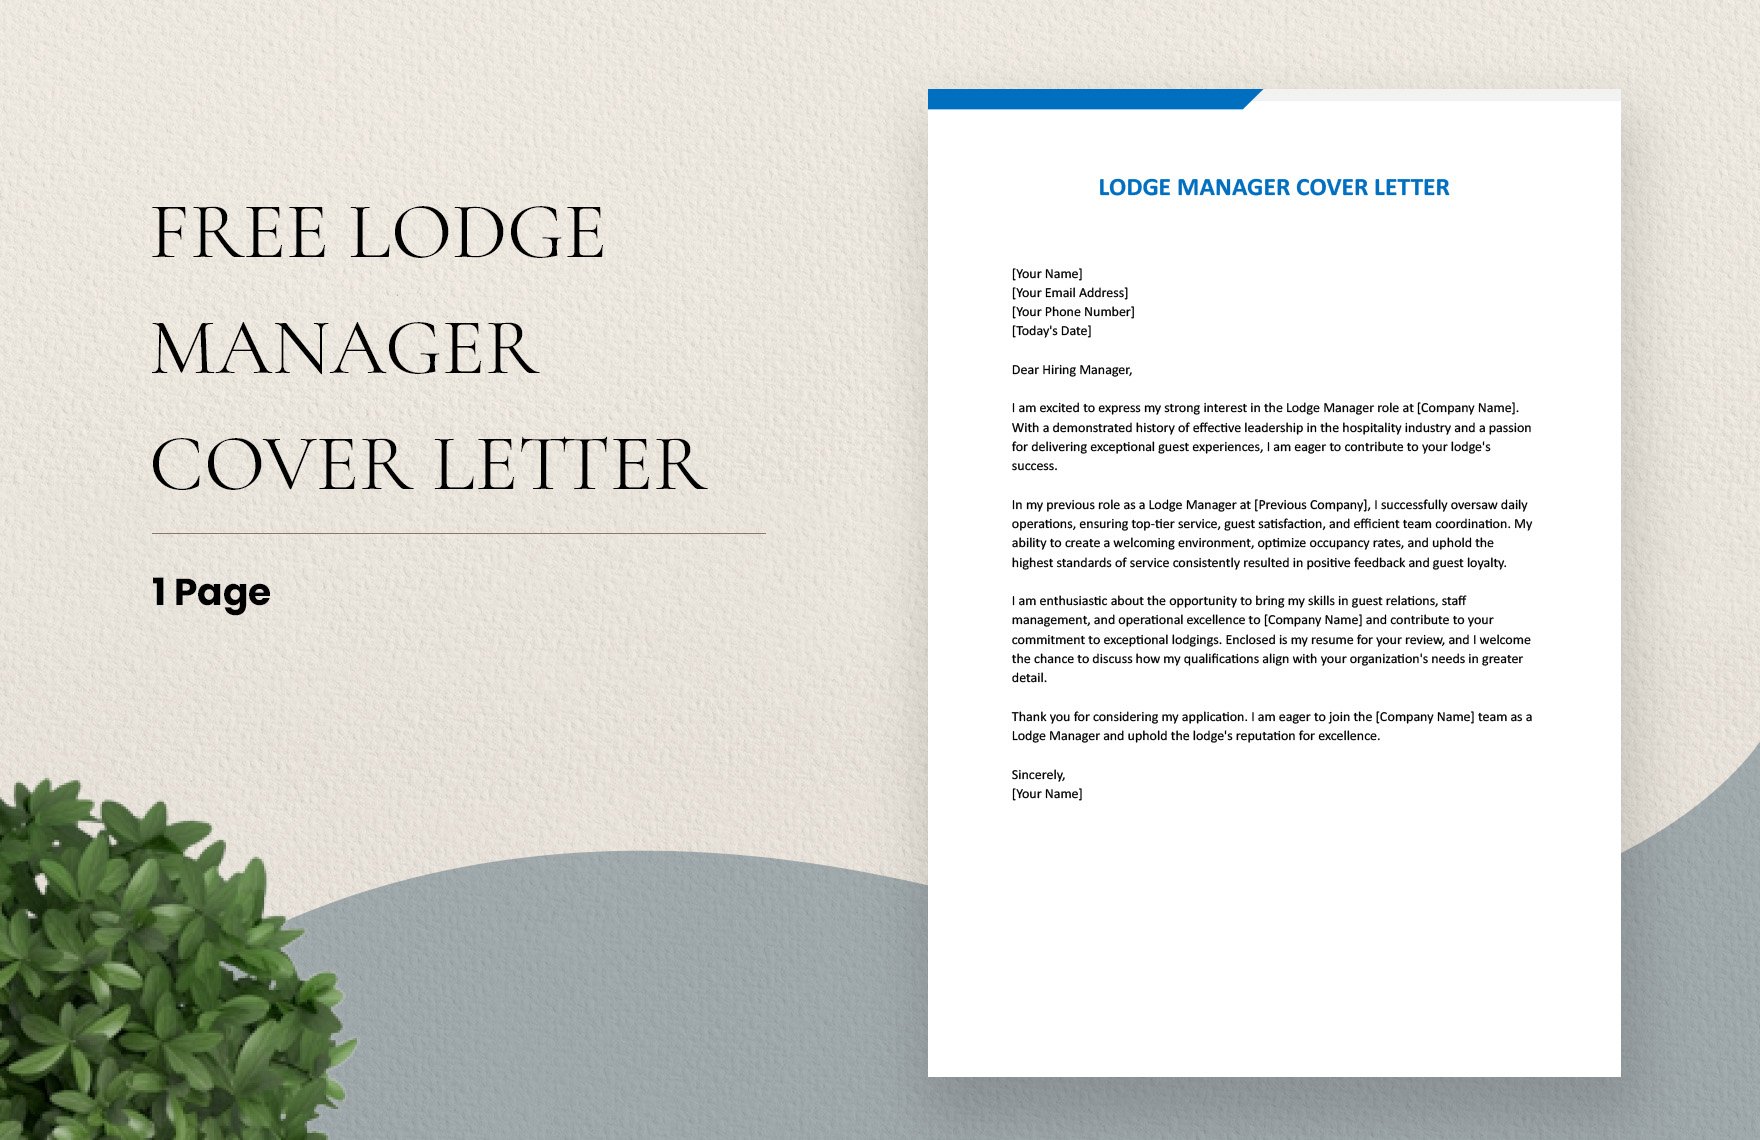 Lodge Manager Cover Letter